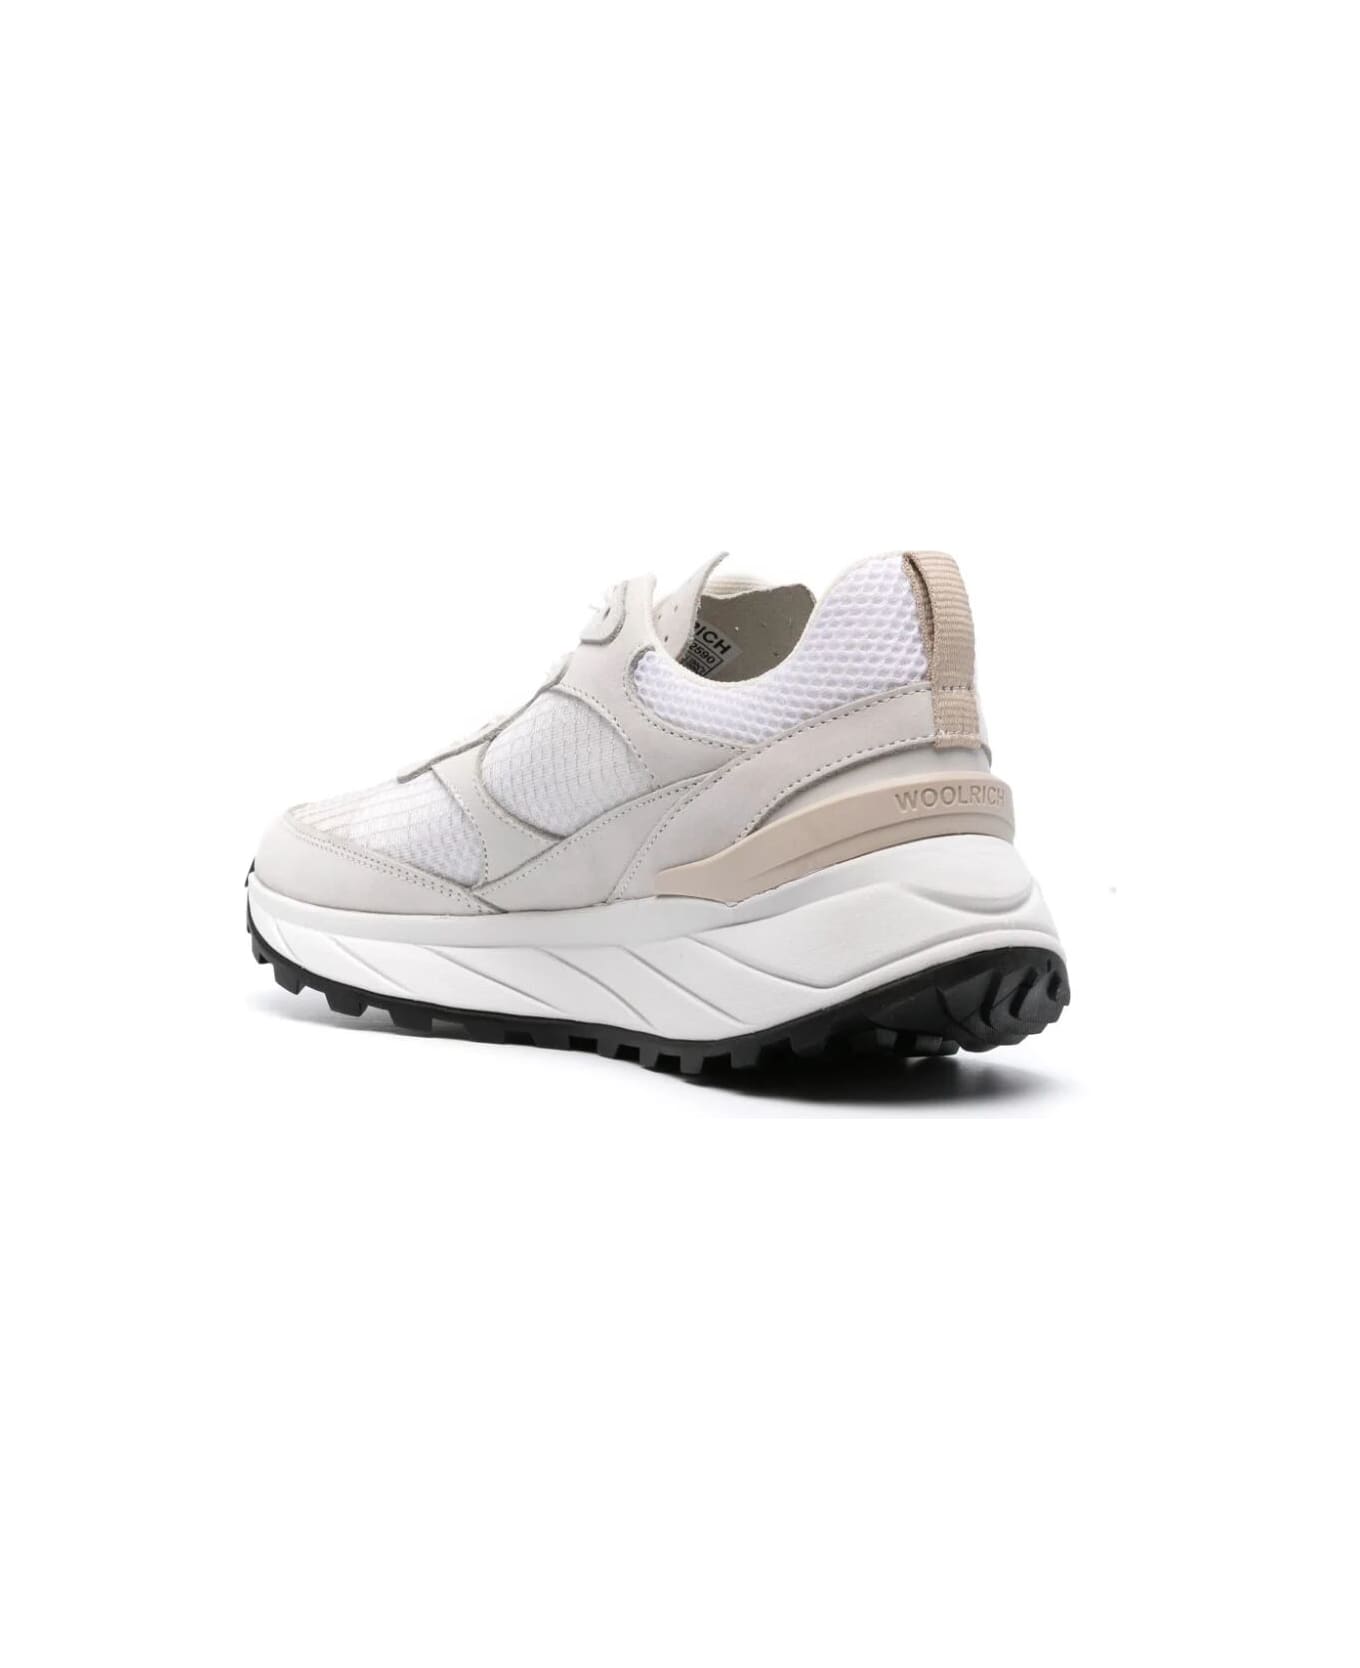 Woolrich Running Sneakers - White White